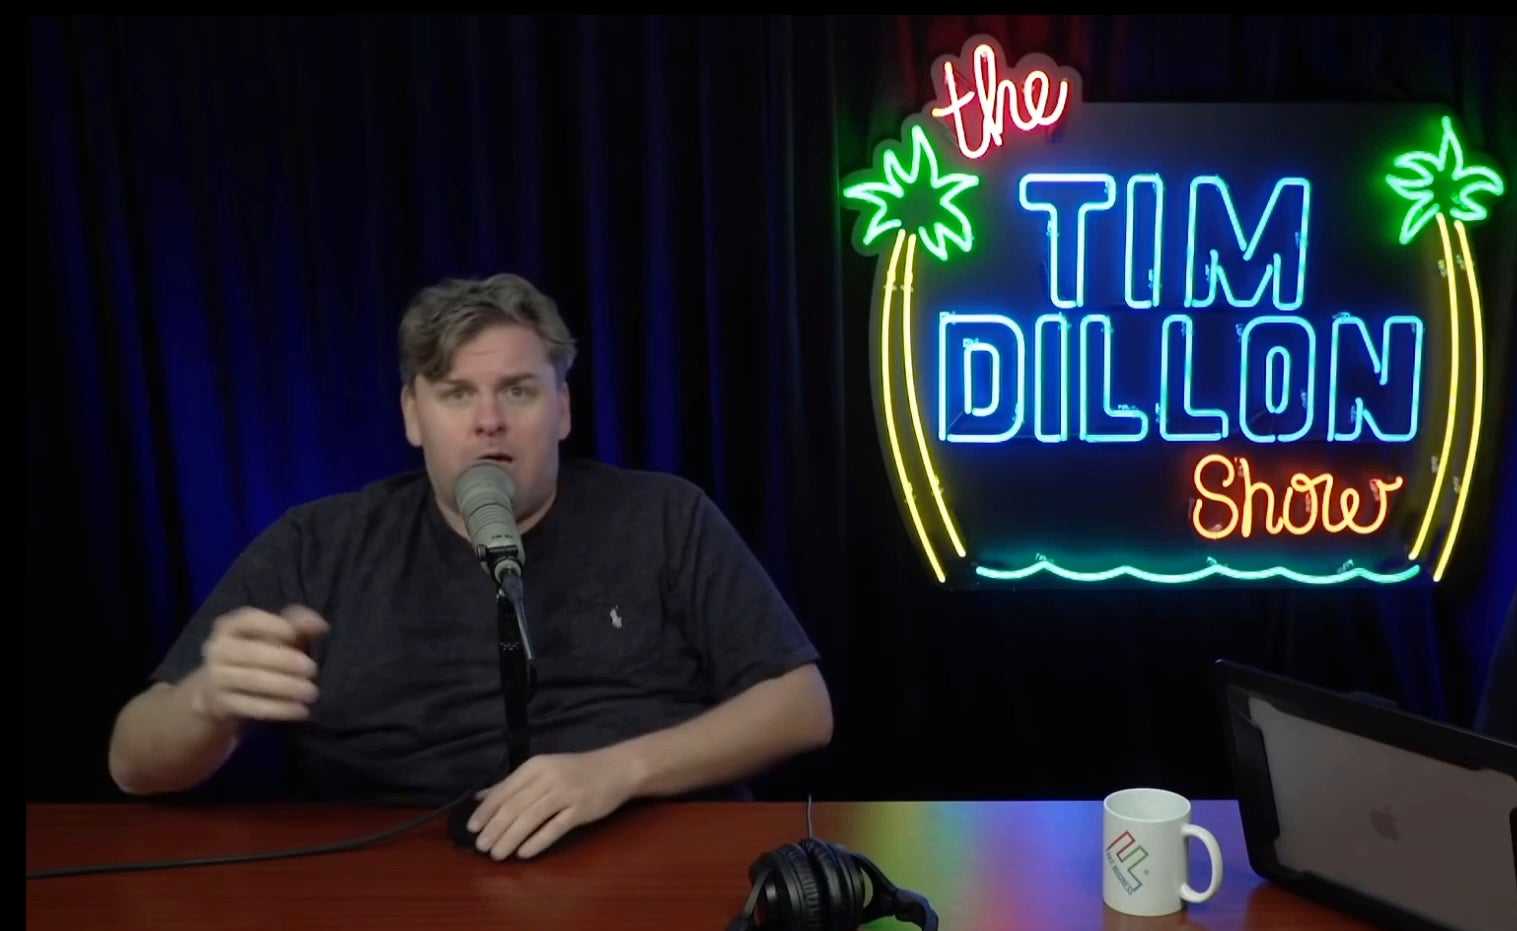 Image of talented comedian, Tim Dillon in his own show